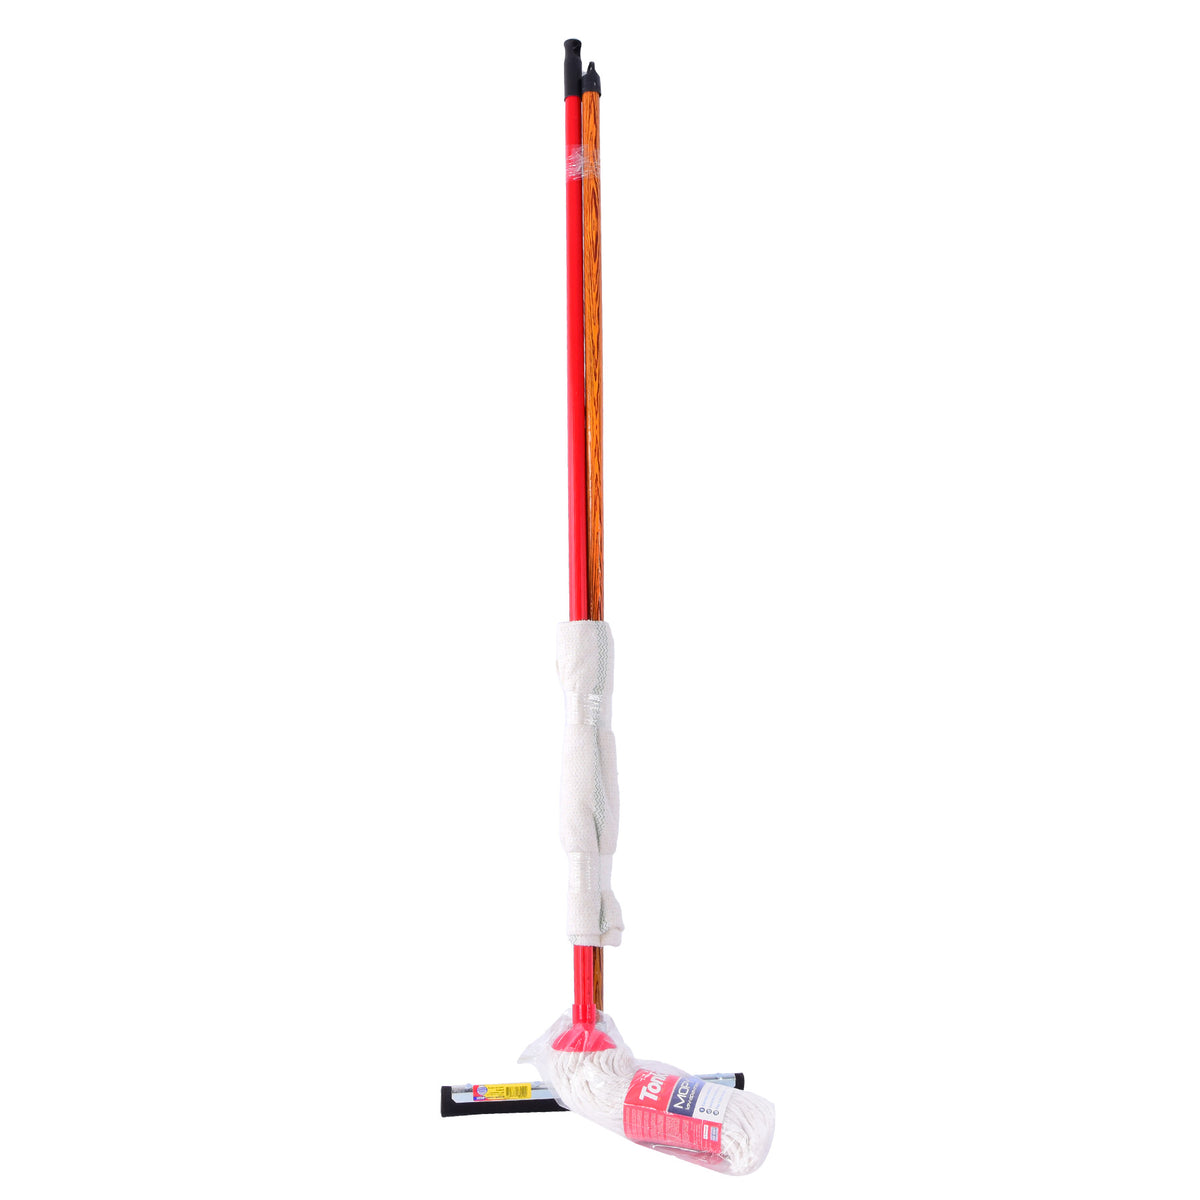 Cotton Mop with SqueegeeA high quality cotton mop with a squeegee.